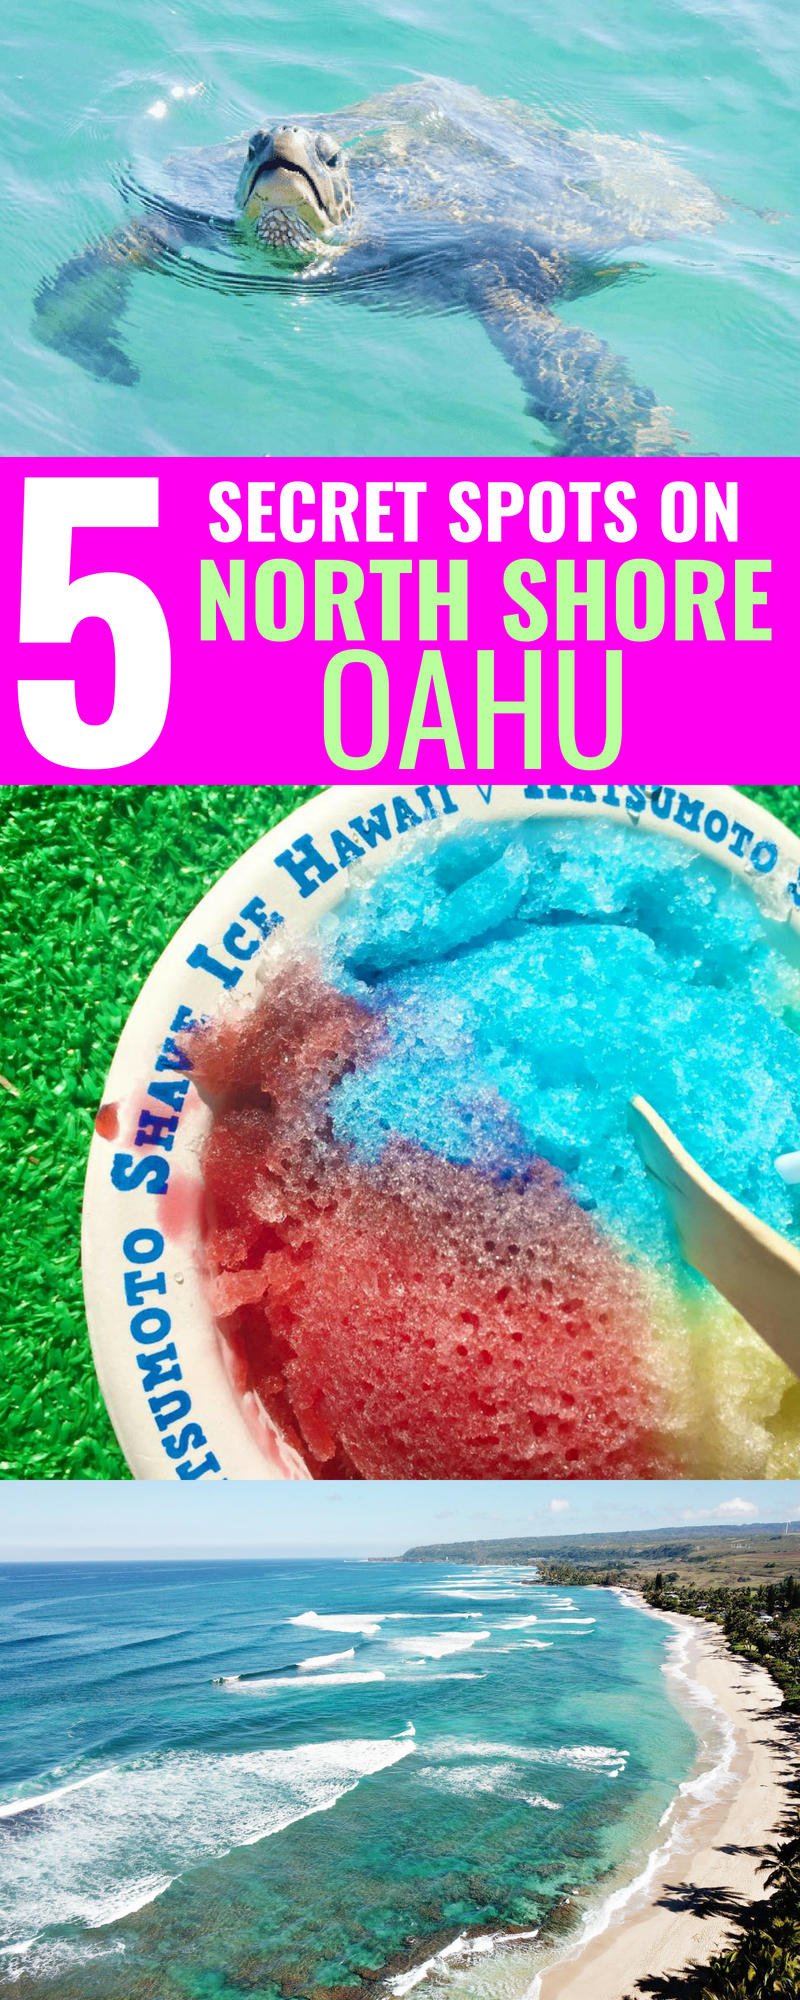 5 Must See Places On Oahu's North Shore - North Shore Oahu - Honolulu Hawaii - North Shore Hotels - North Shore Oahu Hawaii - North Shore Beaches Oahu - Oahu Northshore -North Shore Oahu Restaurants - North Shore Oahu Recommendations - Communikait by kait Hanson #oahu #hawaii #northshore